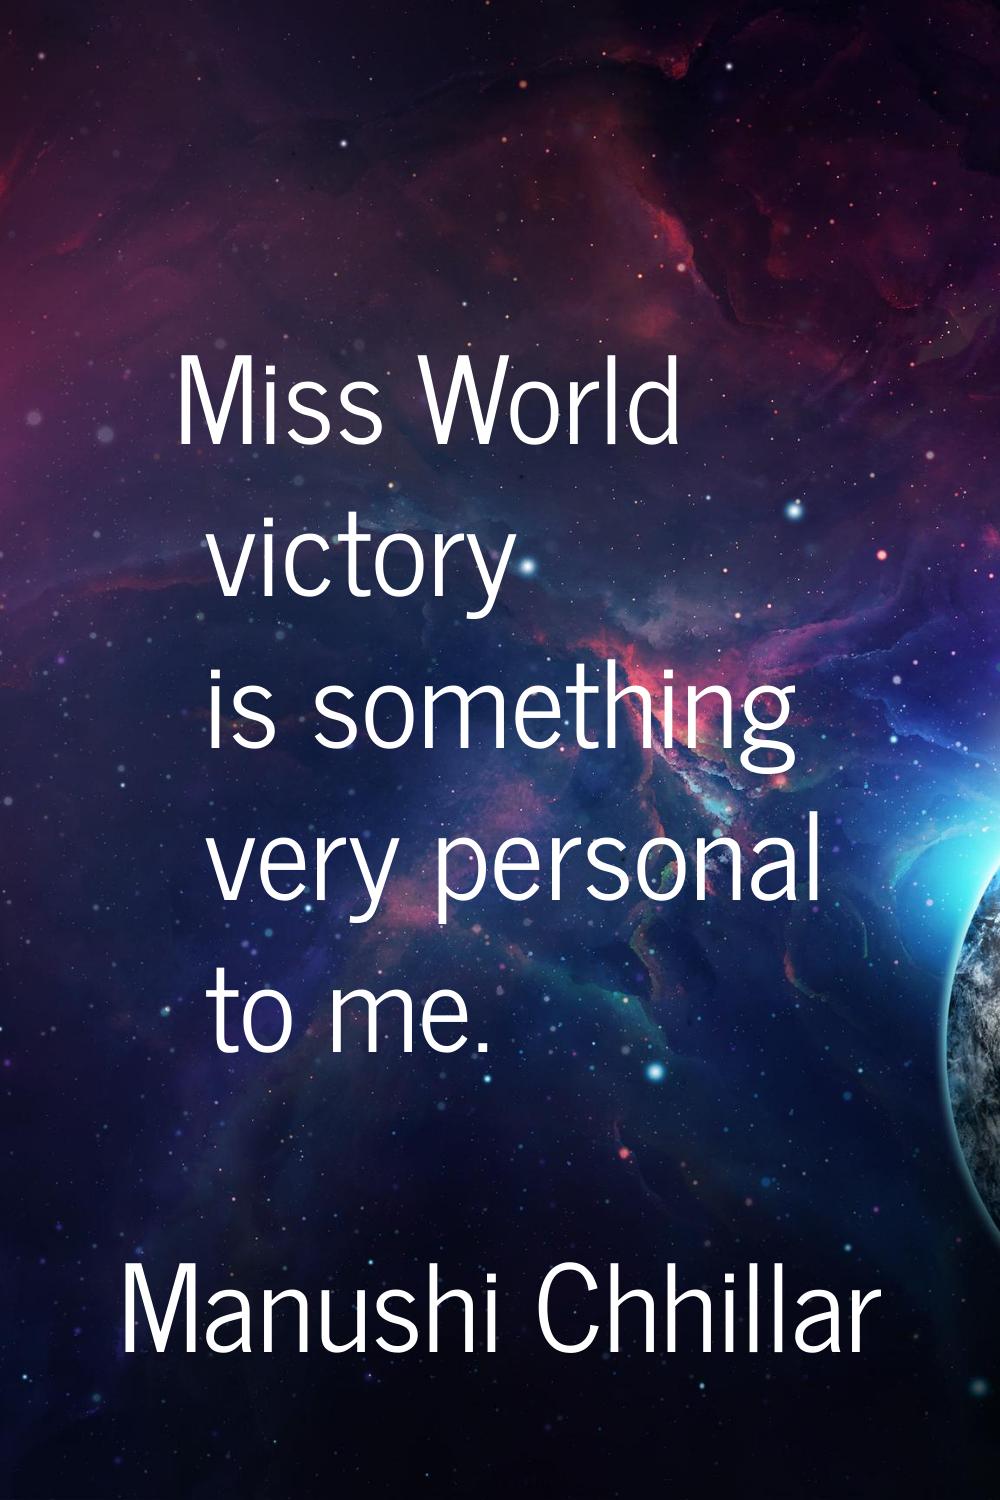 Miss World victory is something very personal to me.